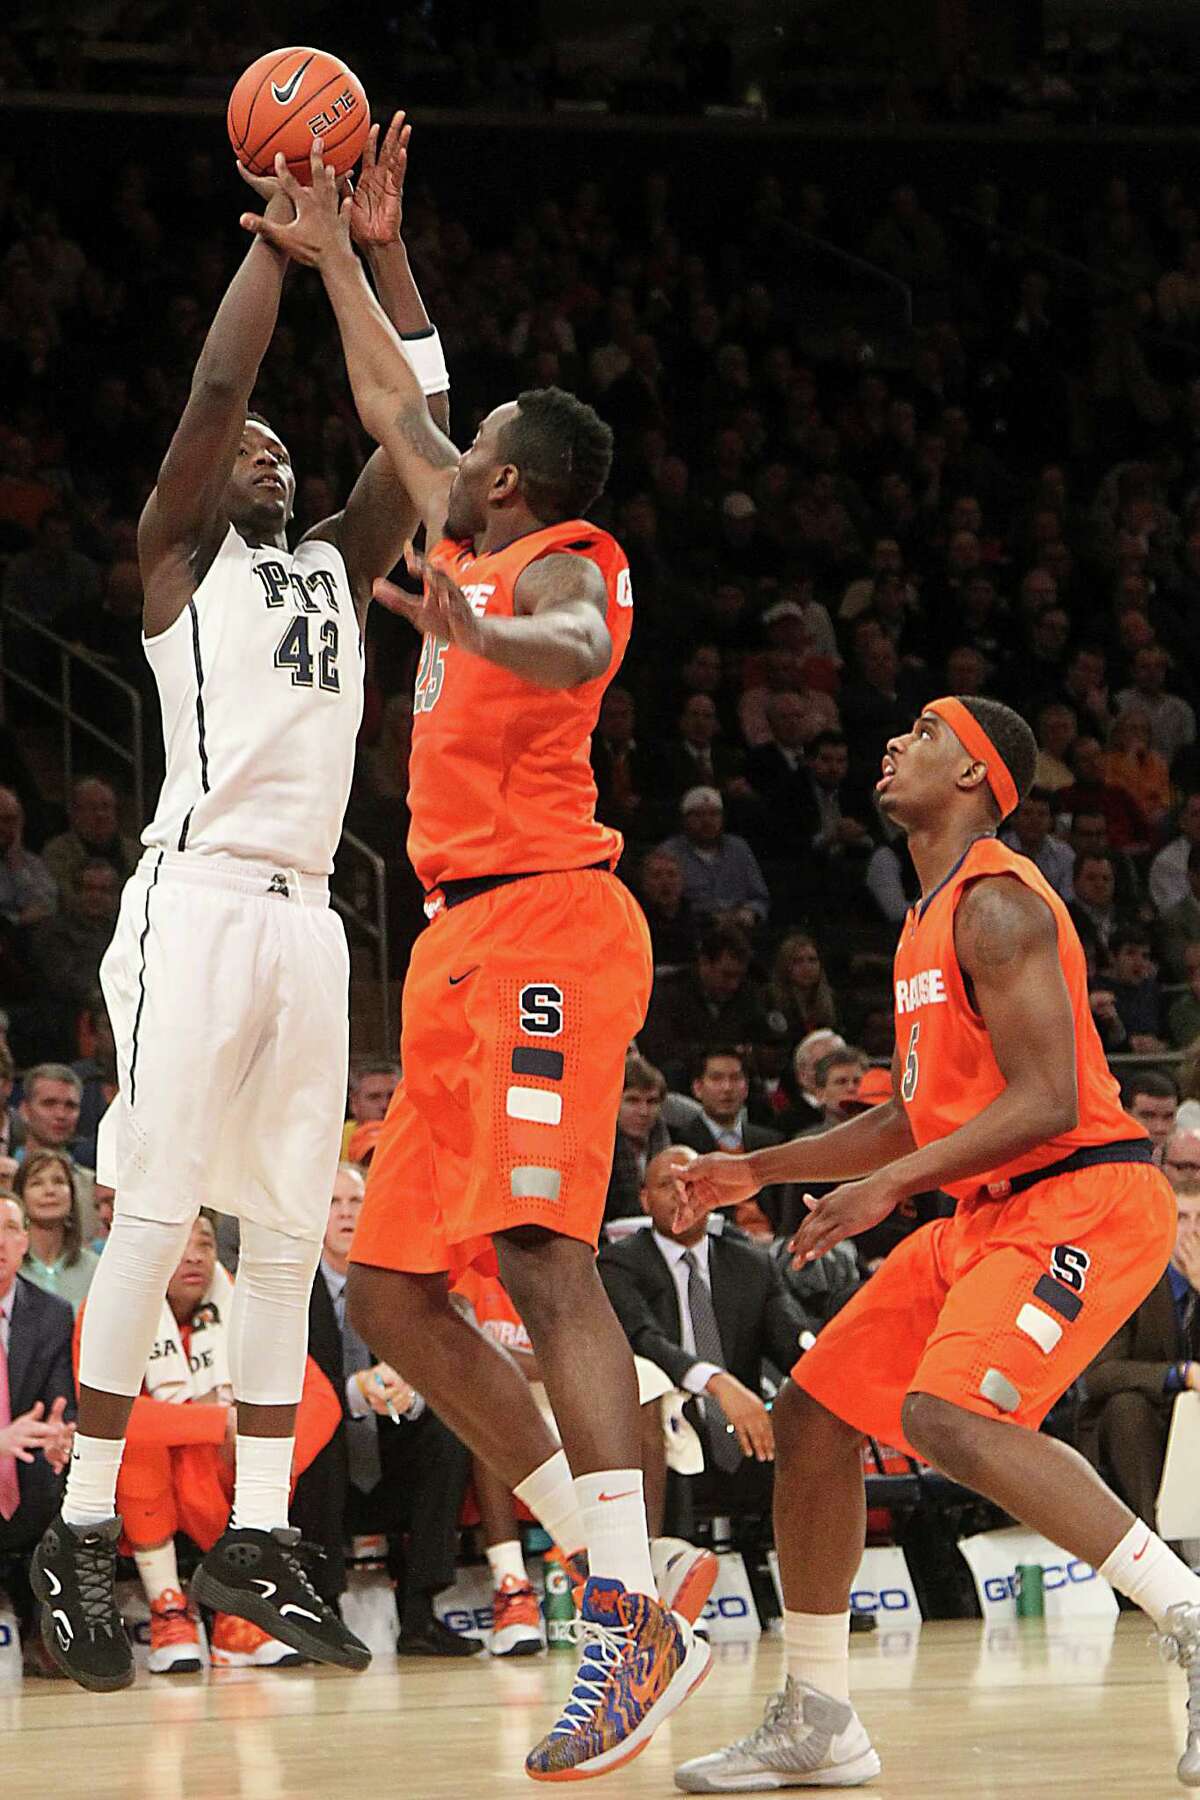 Pittsburgh's Talib Zanna (42) goes up past Syracuse's Rakeem Christmas (25) and C.J. Fair during the first half of an NCAA college basketball game at the Big East Conference tournament, Thursday, March 14, 2013 in New York. (AP Photo/Mary Altaffer)